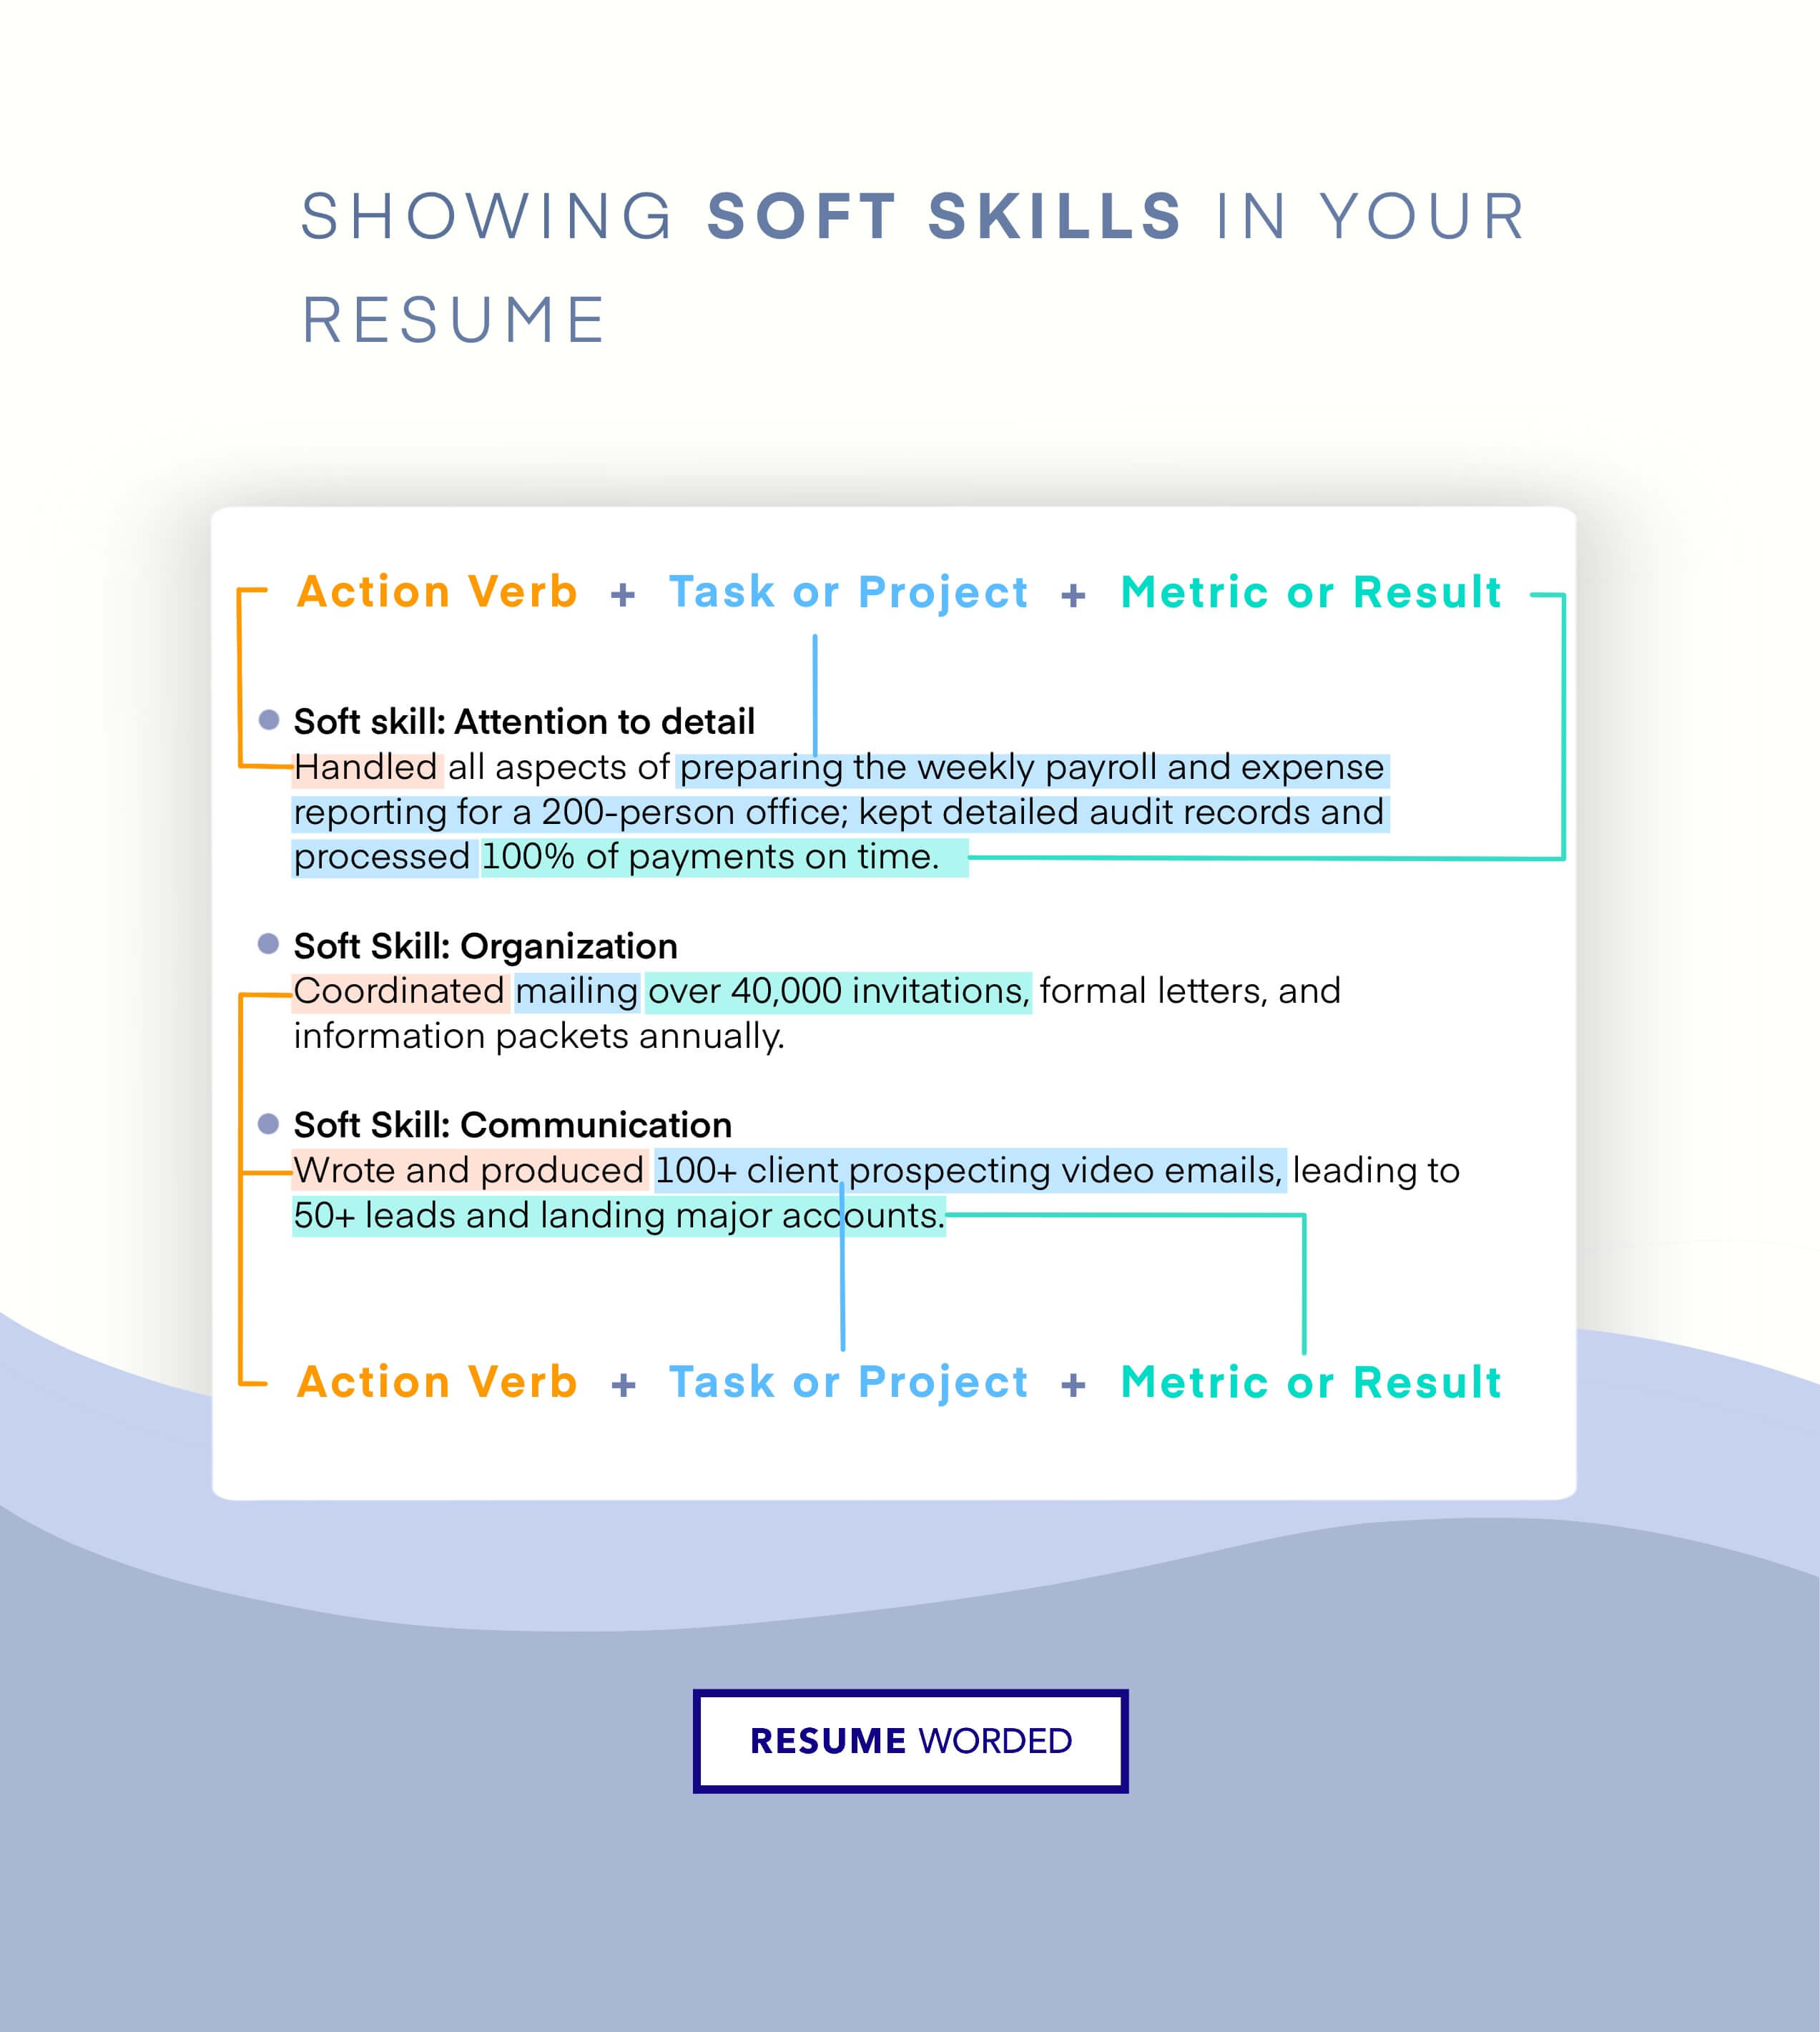 How to show specific soft skills by emphasizing accomplishments in your bullet points